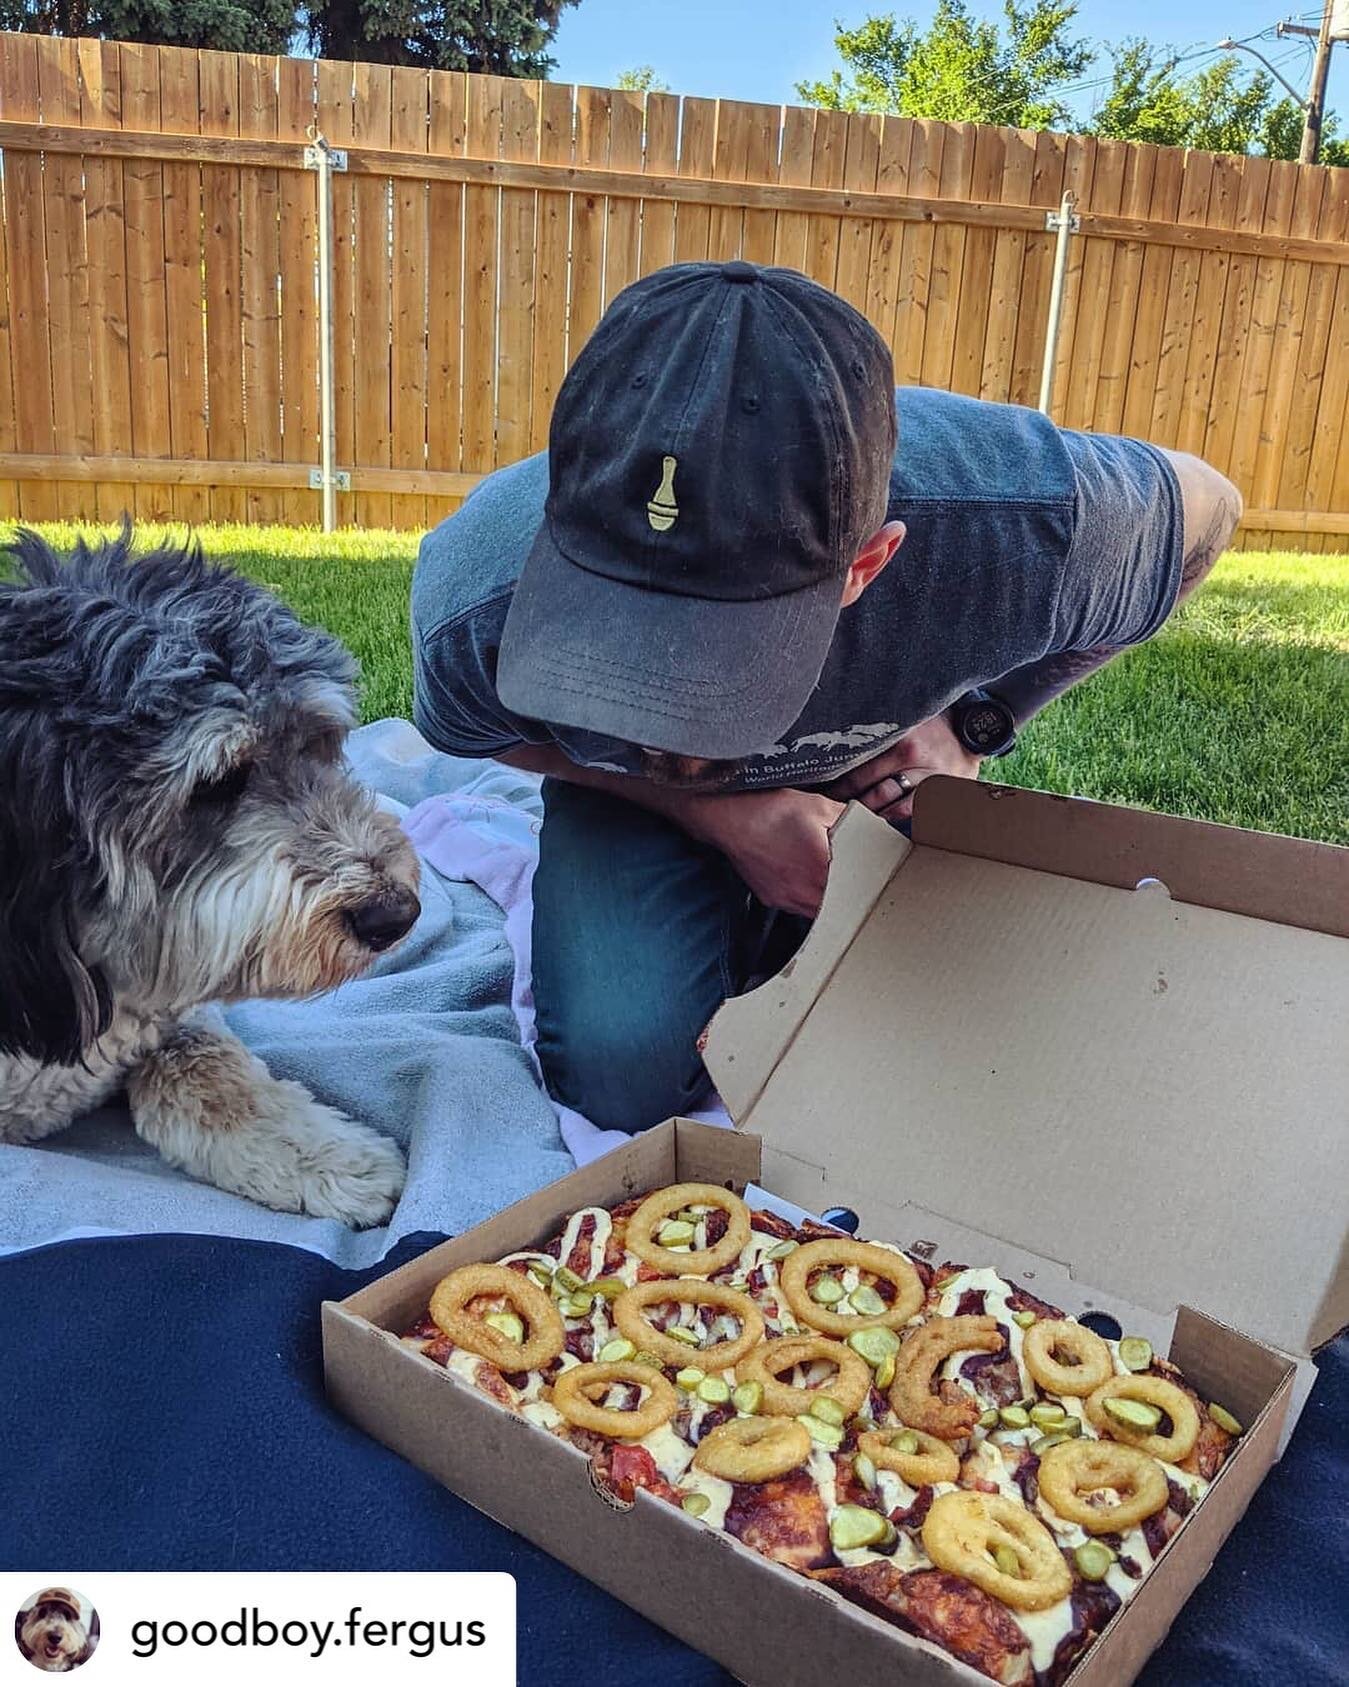 ALL DOGS DO BE GOING TO HEAVEN

#repost &bull; @goodboy.fergus Reminiscing about last weekend's backyard pizza 🍕